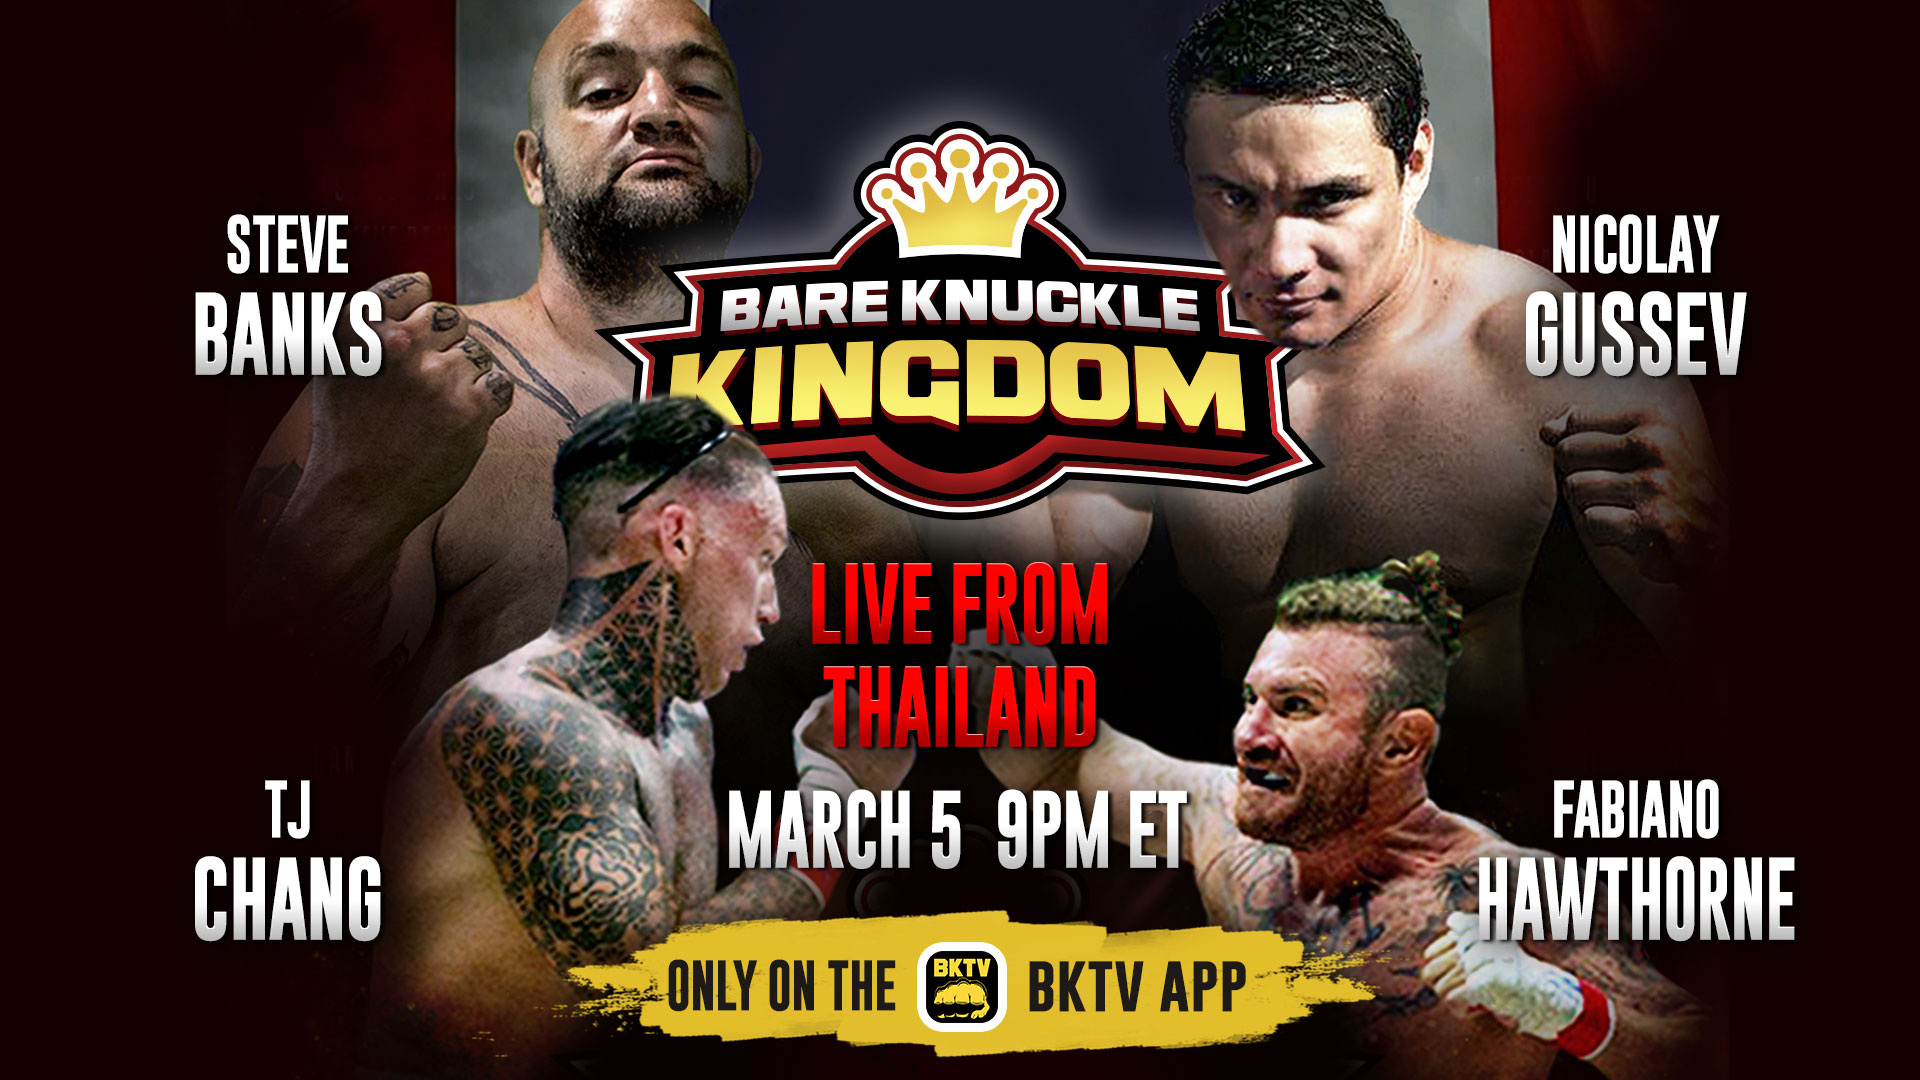 OFFICIAL Bareknuckle Fighting Championship presents...Bare Knuckle Kingdom 1 Live From Thailand